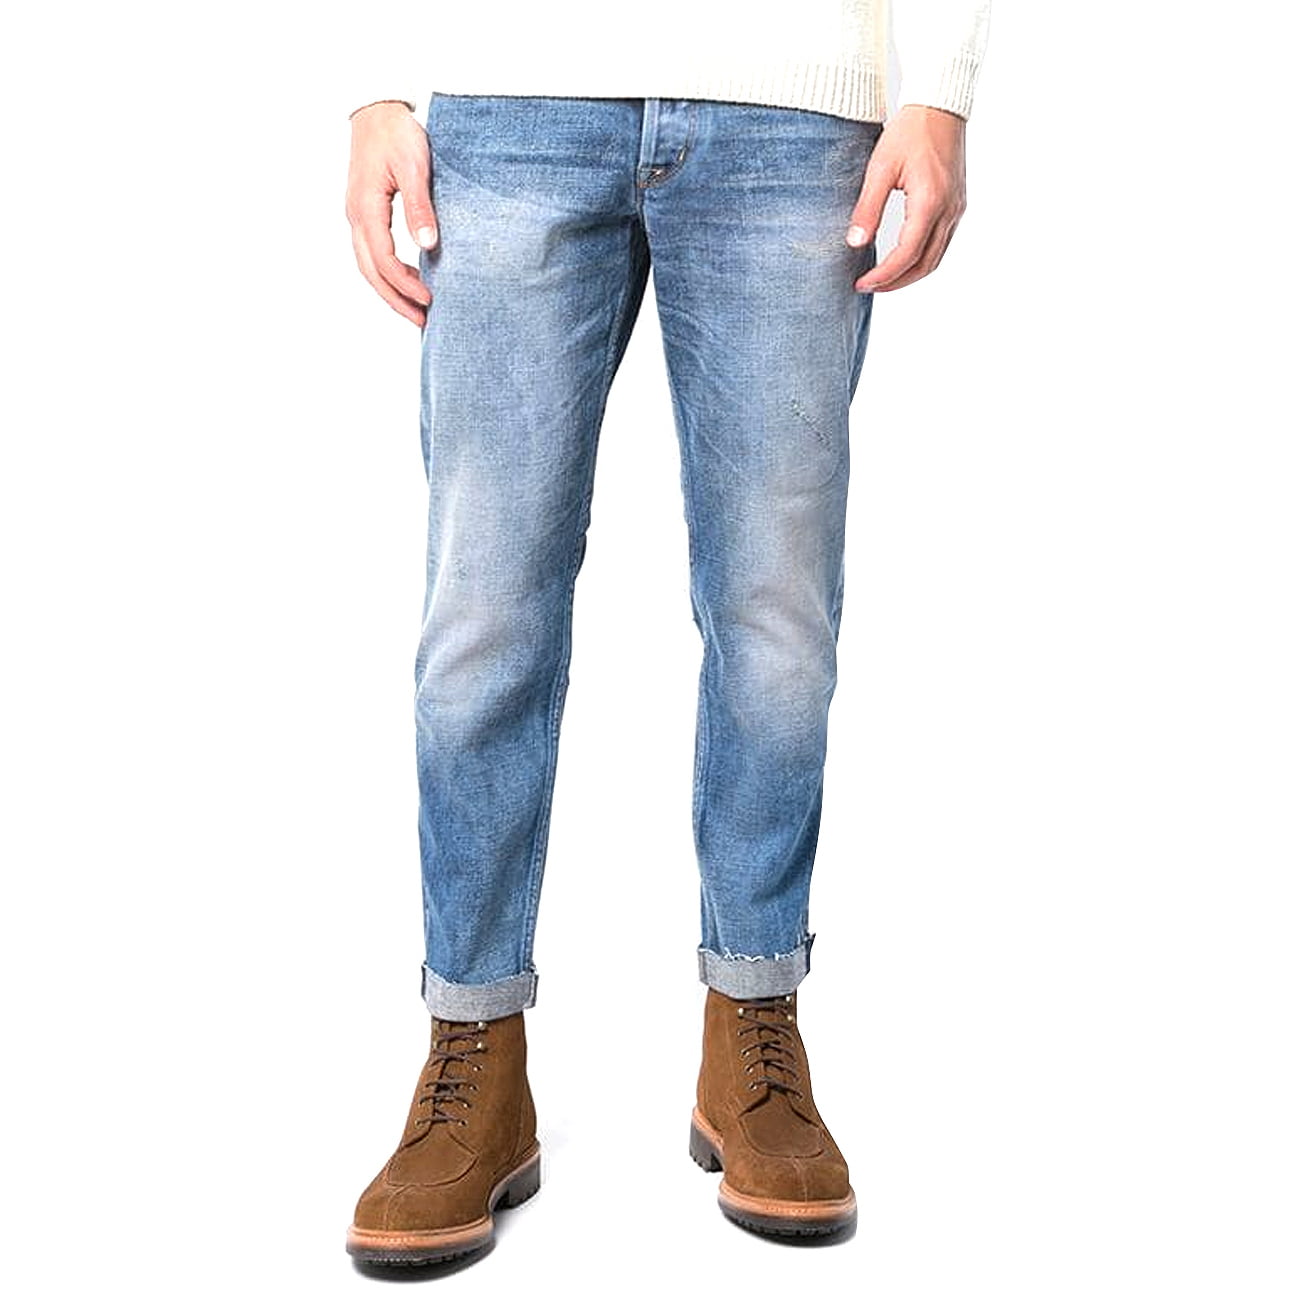 relaxed skinny jeans mens